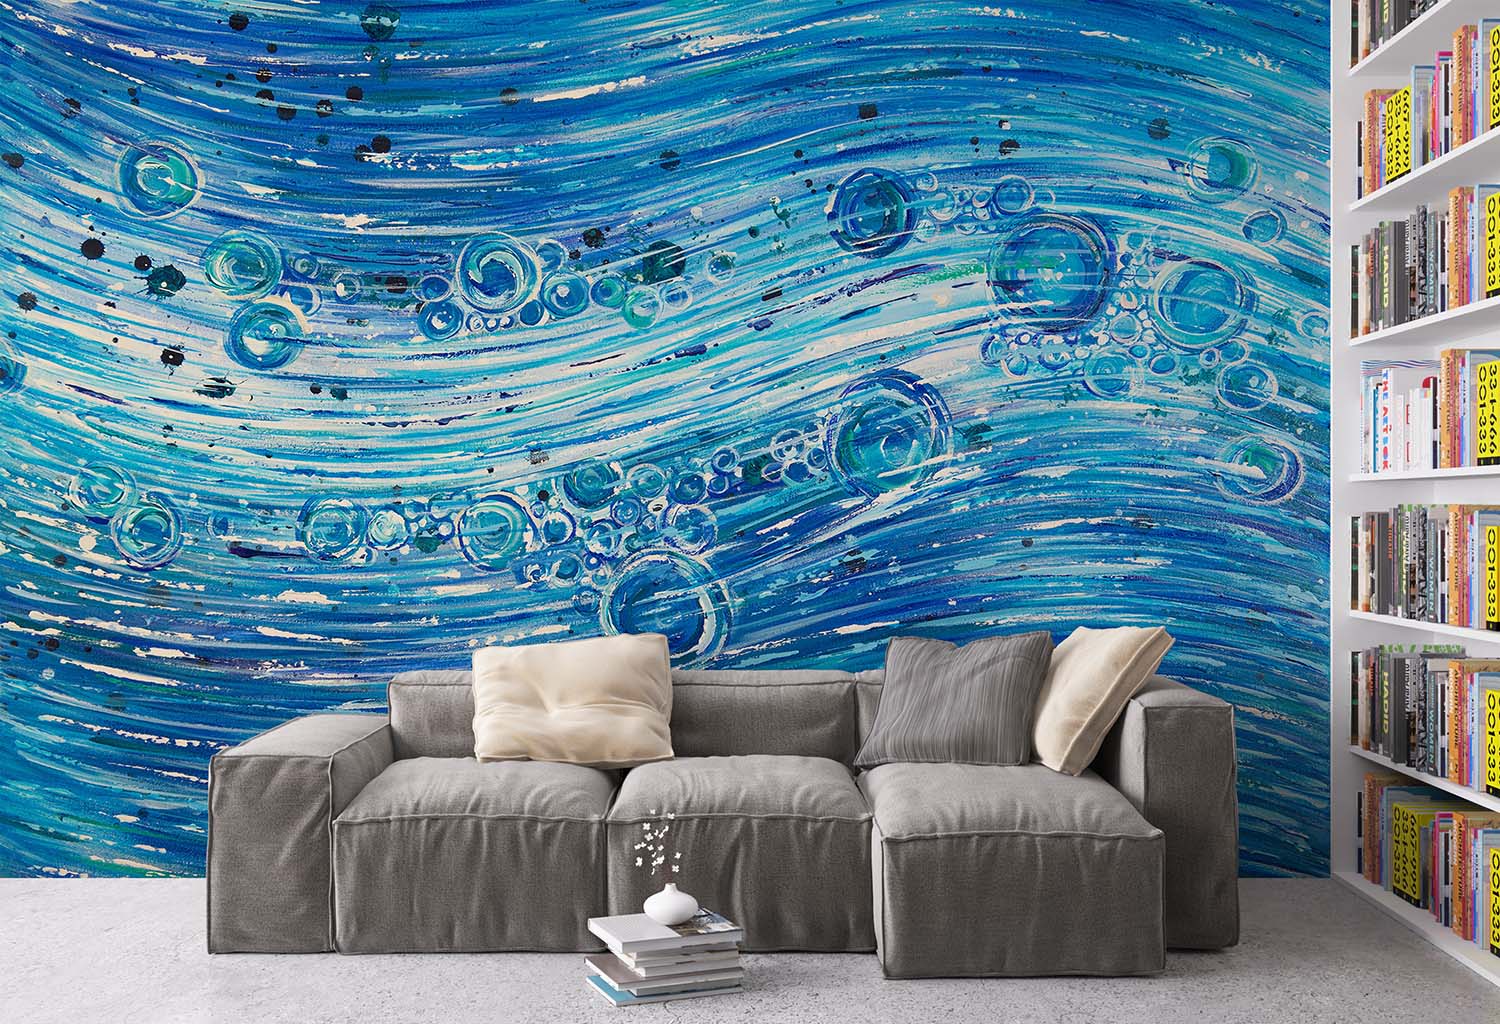 Mural of water flowing and bubbling called 1420 Flow by Doug LaRue